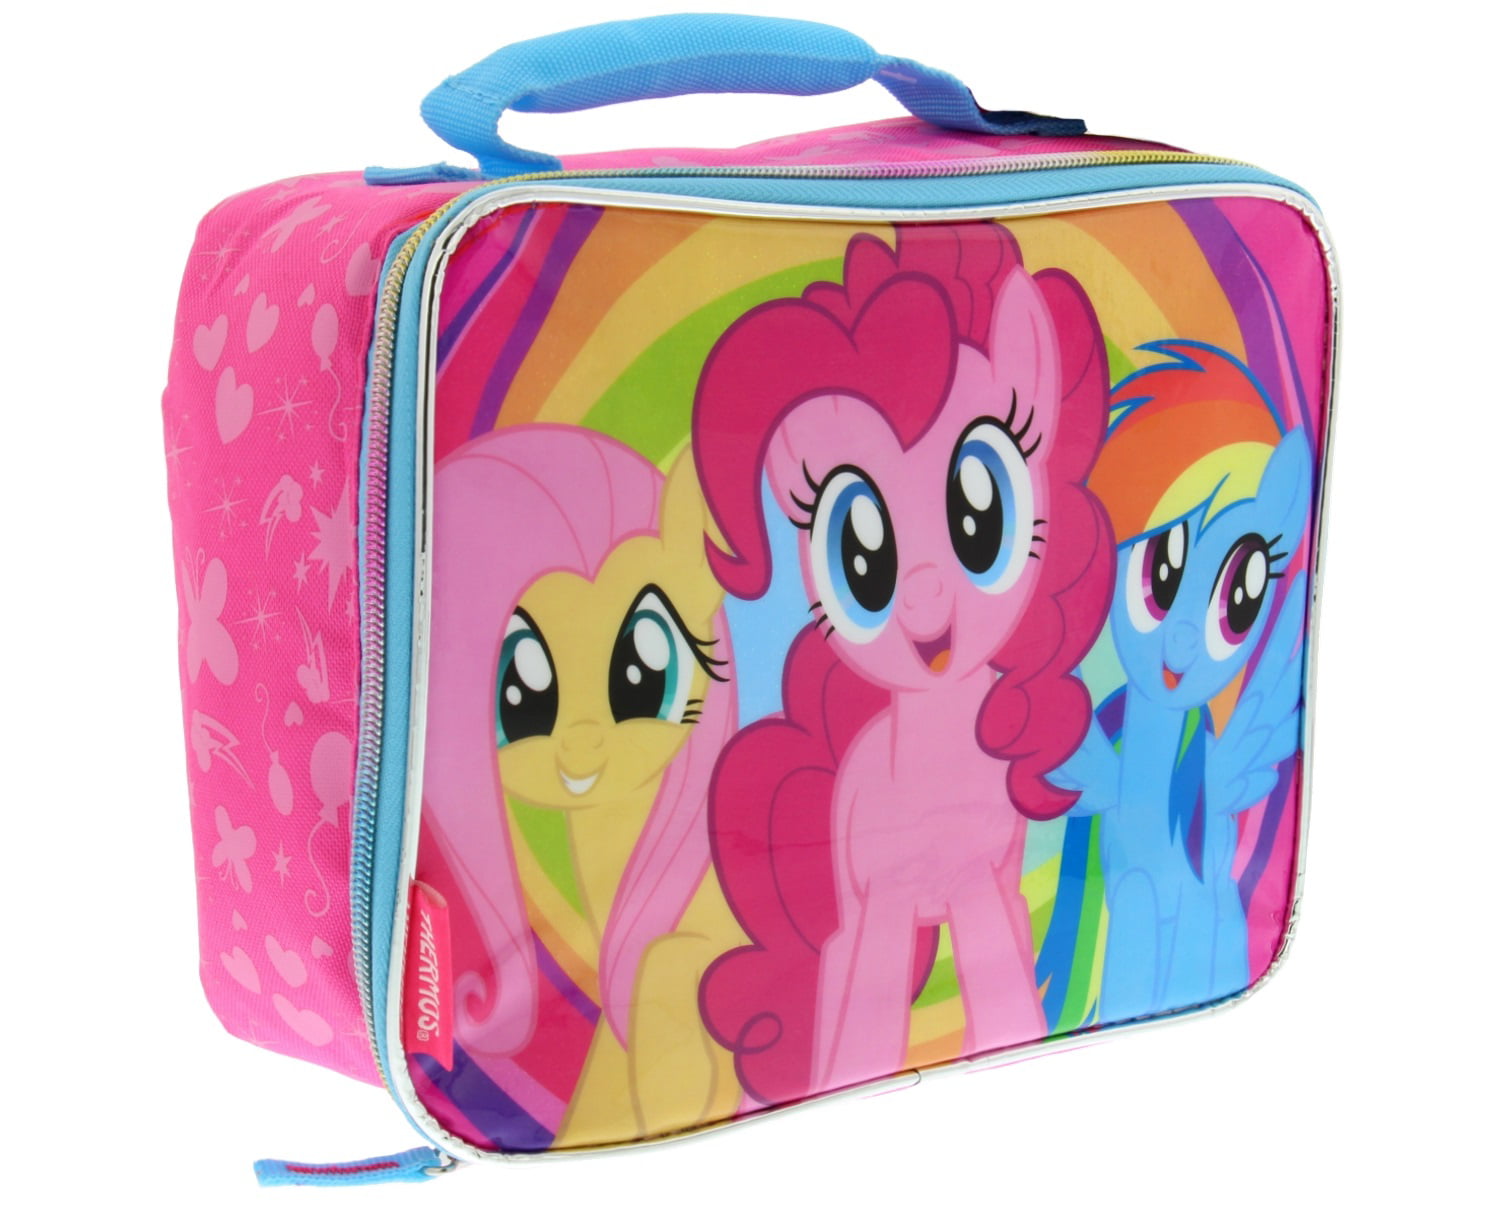 Did you ever have a My Little Pony Lunch Box or Thermos?